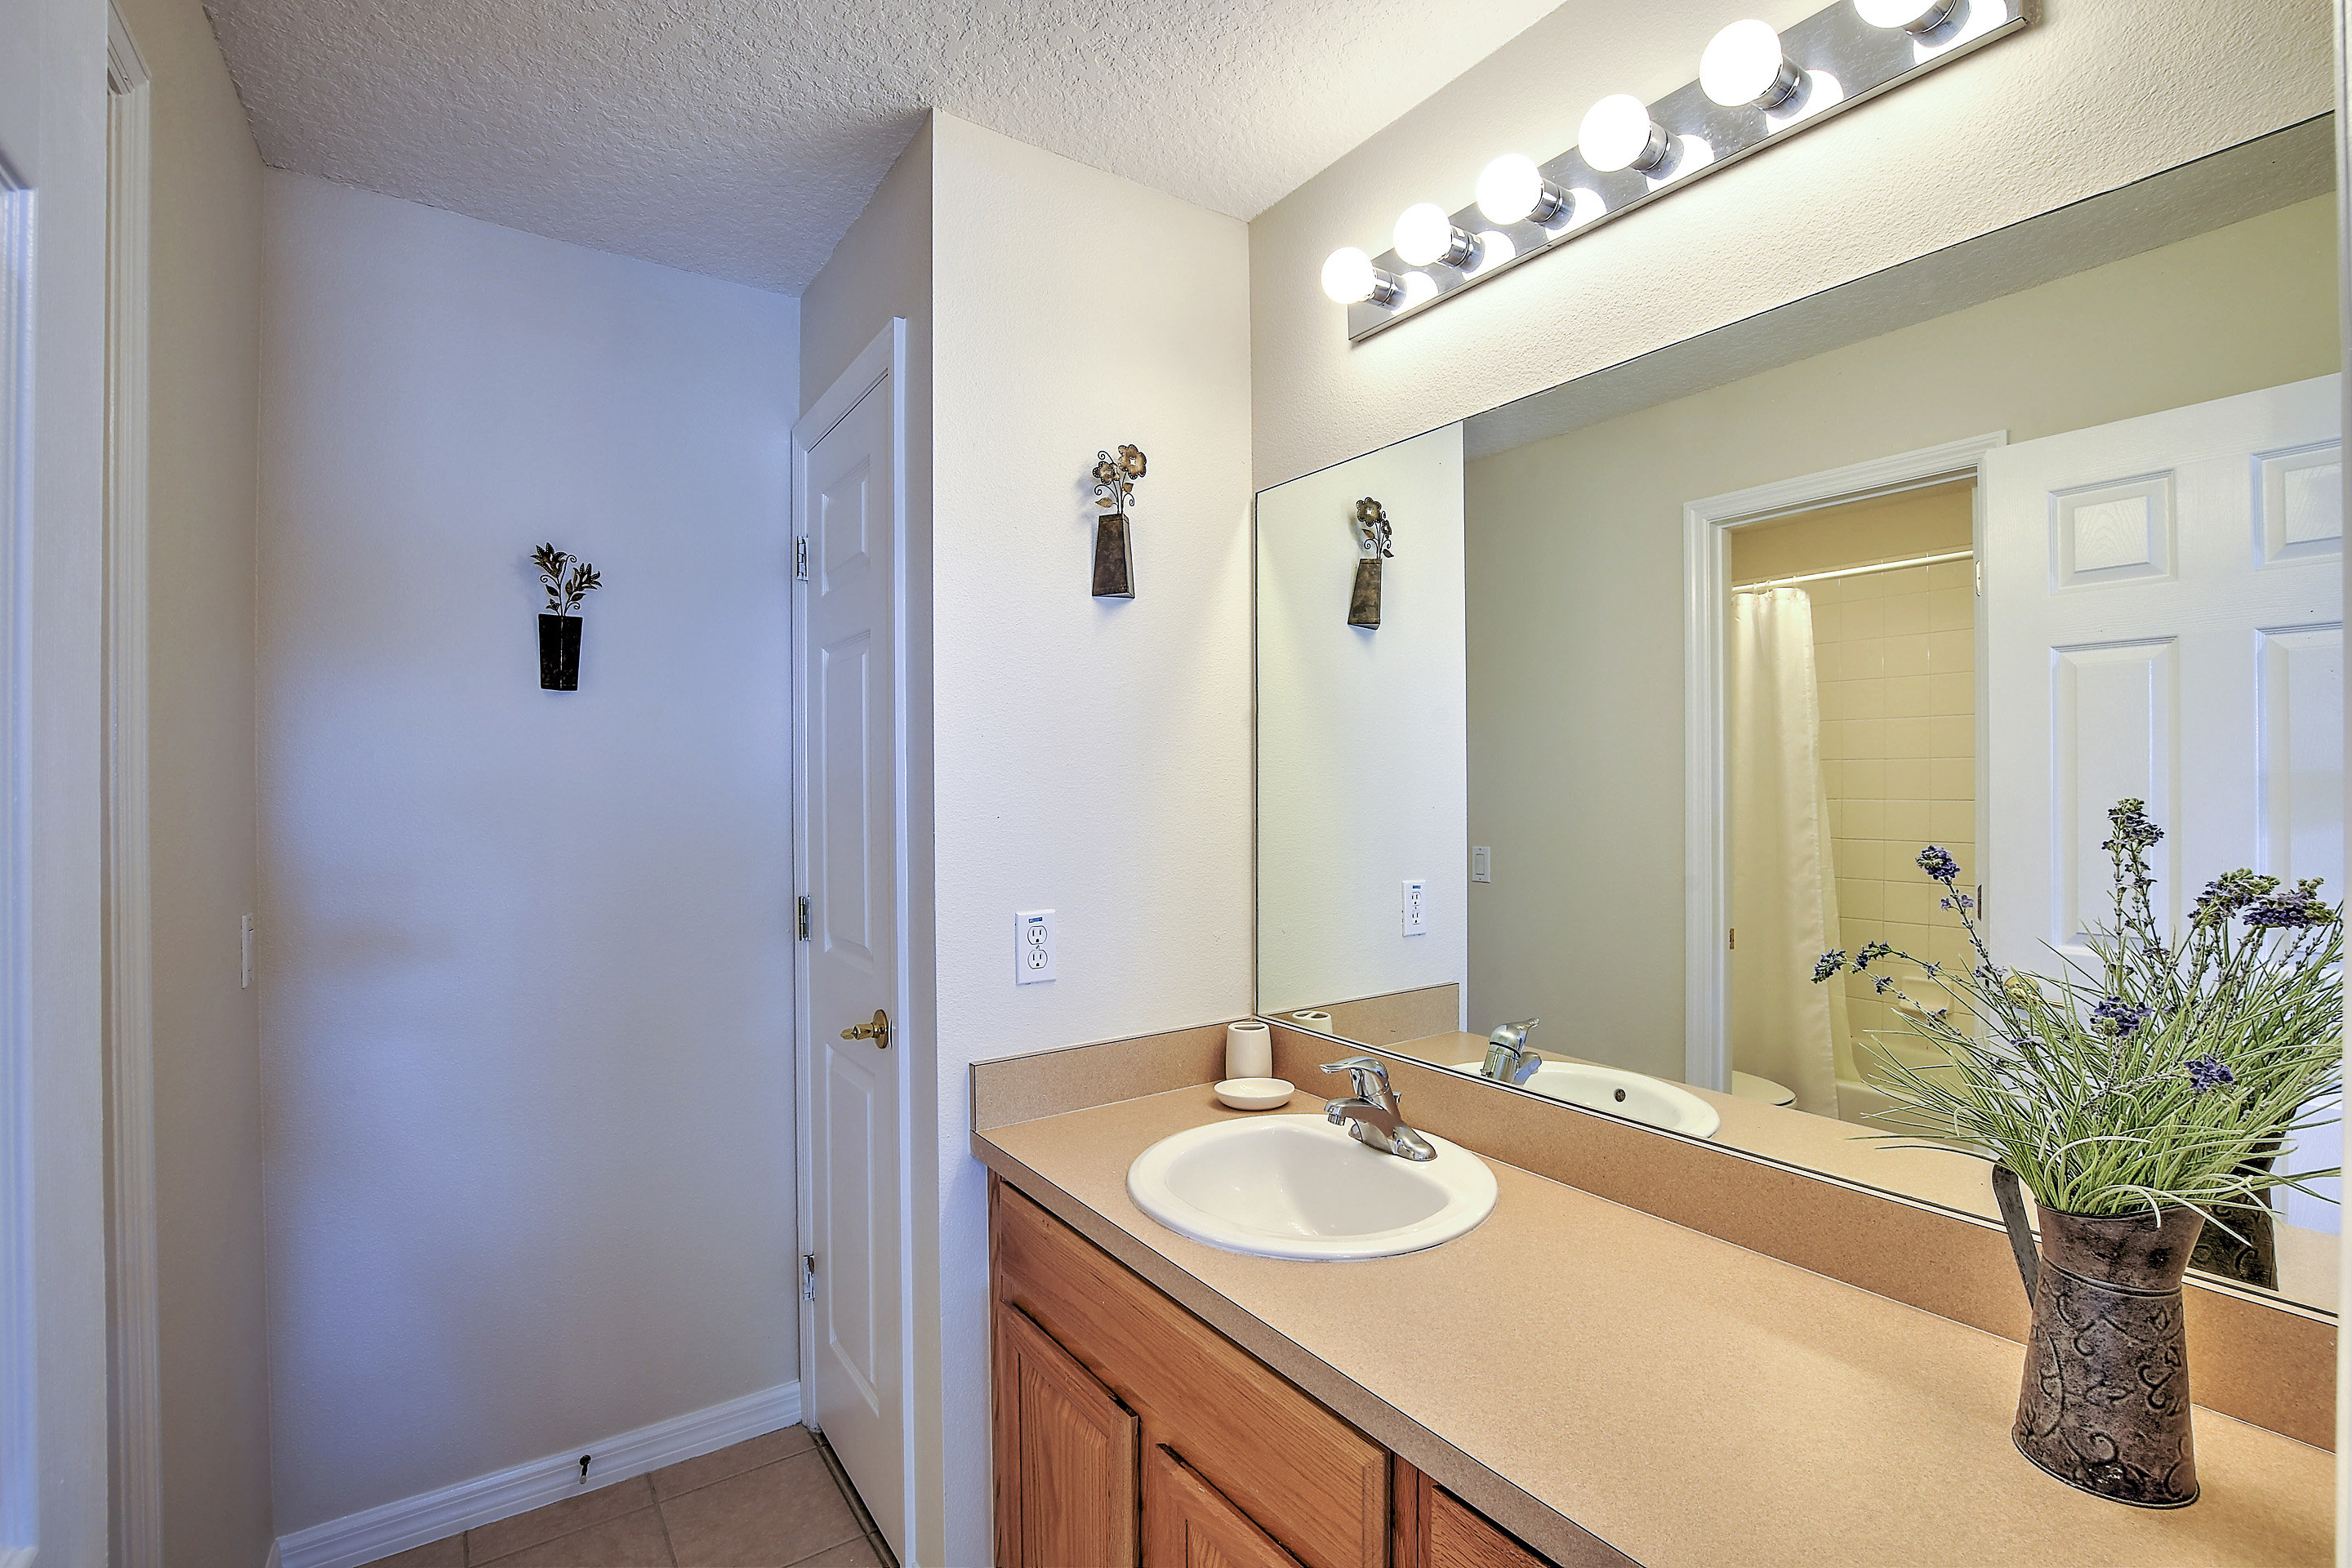 Picture Gallery. 2nd ensuite vanity units